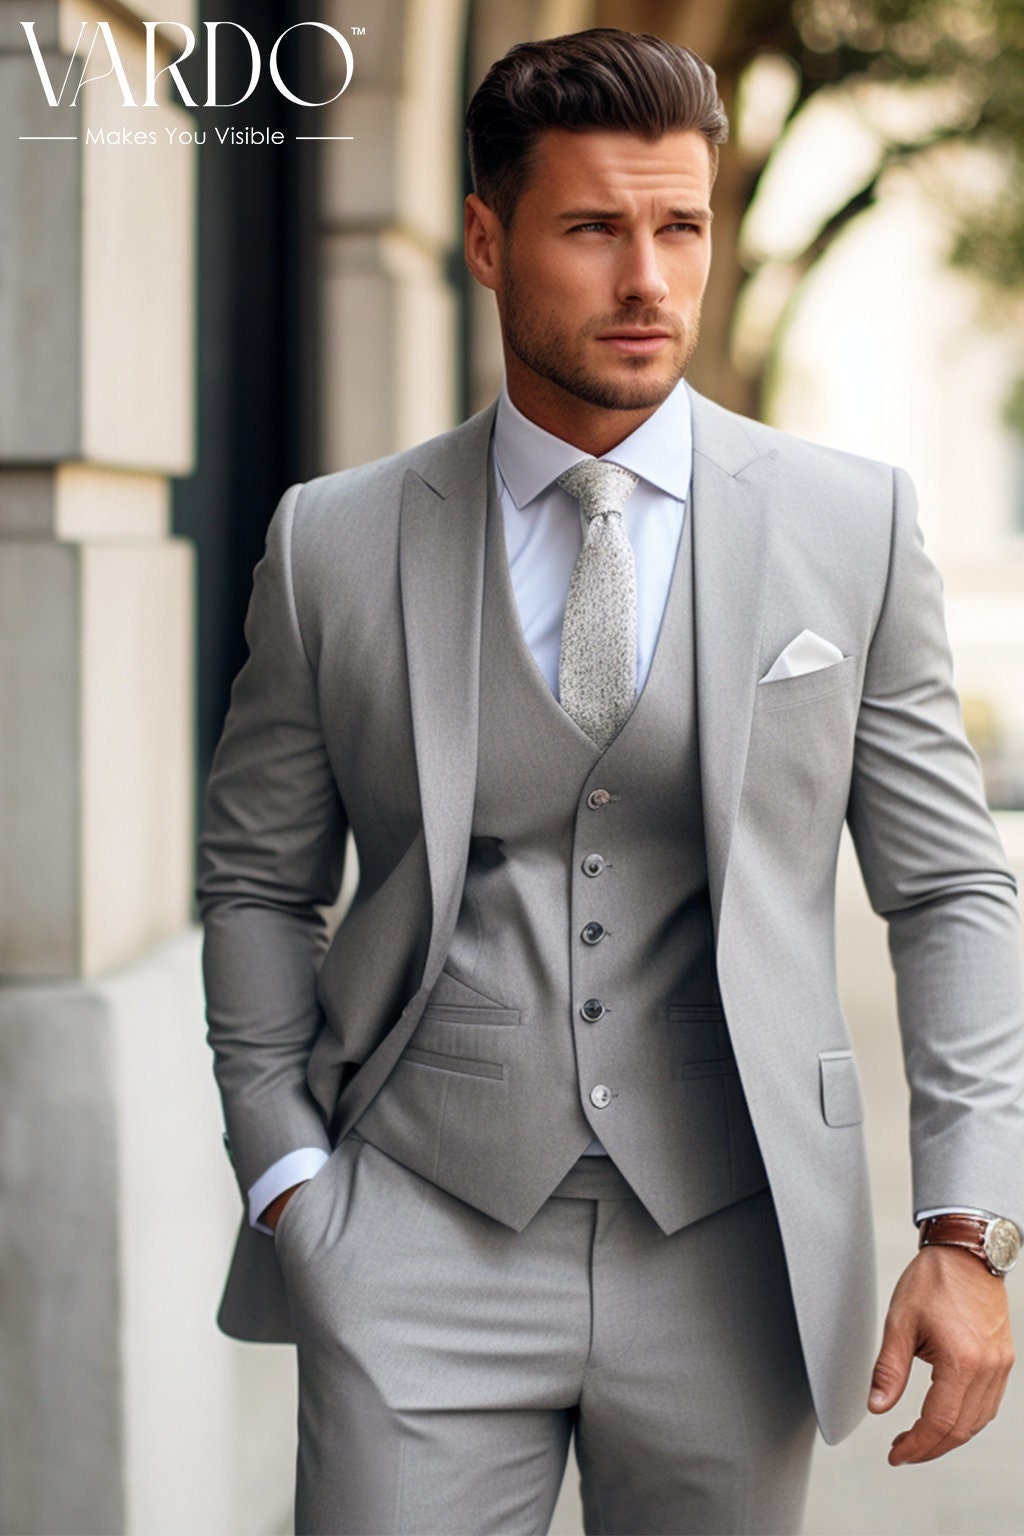 Light Grey Three Piece Suit for Men Formal Wedding, Business, or Special  Occasions Tailored Suit the Rising Sun Store, Vardo 